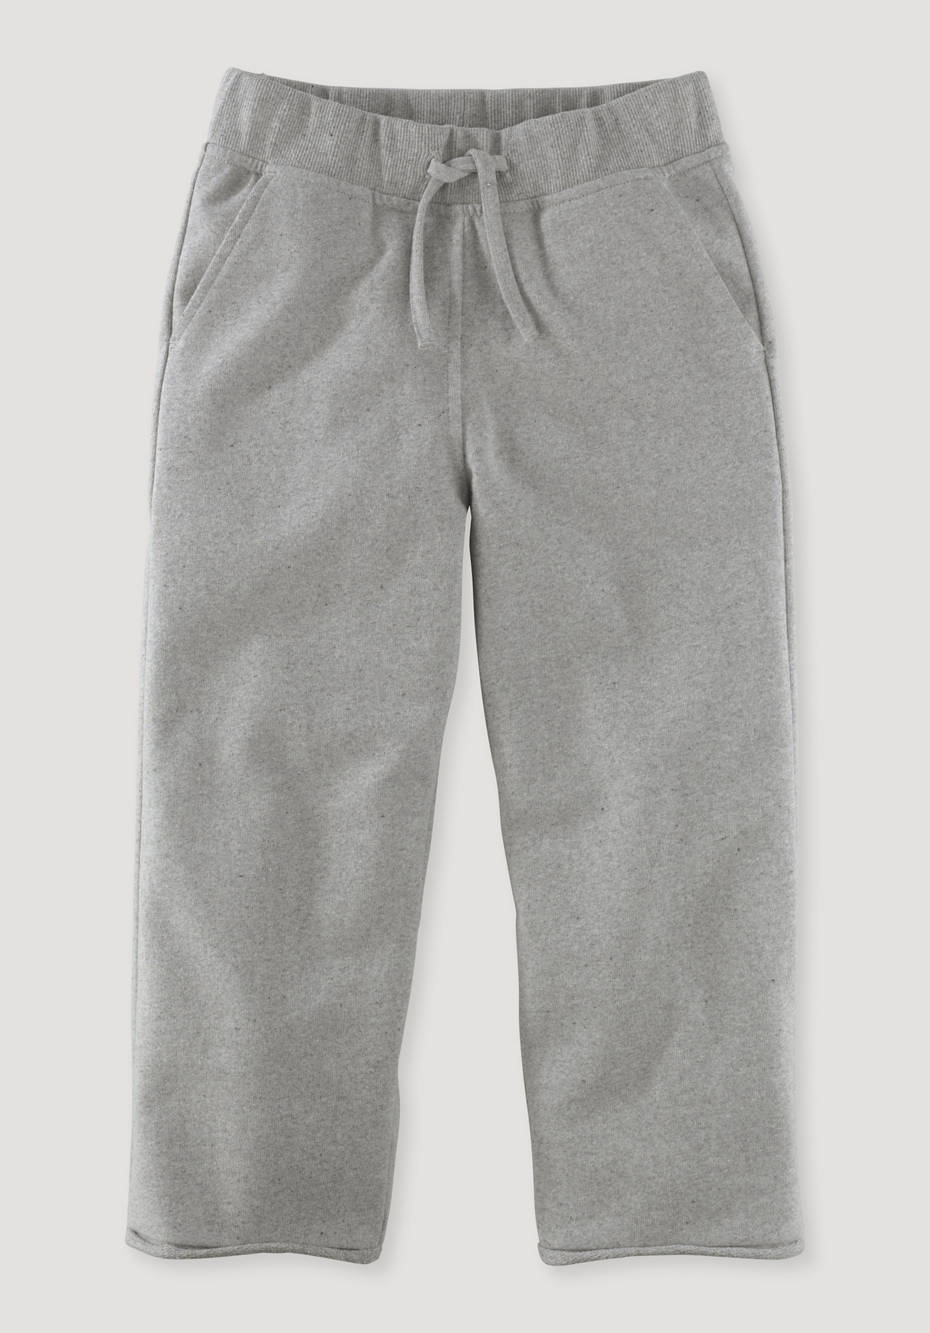 BetterRecycling sweatpants made of pure organic cotton